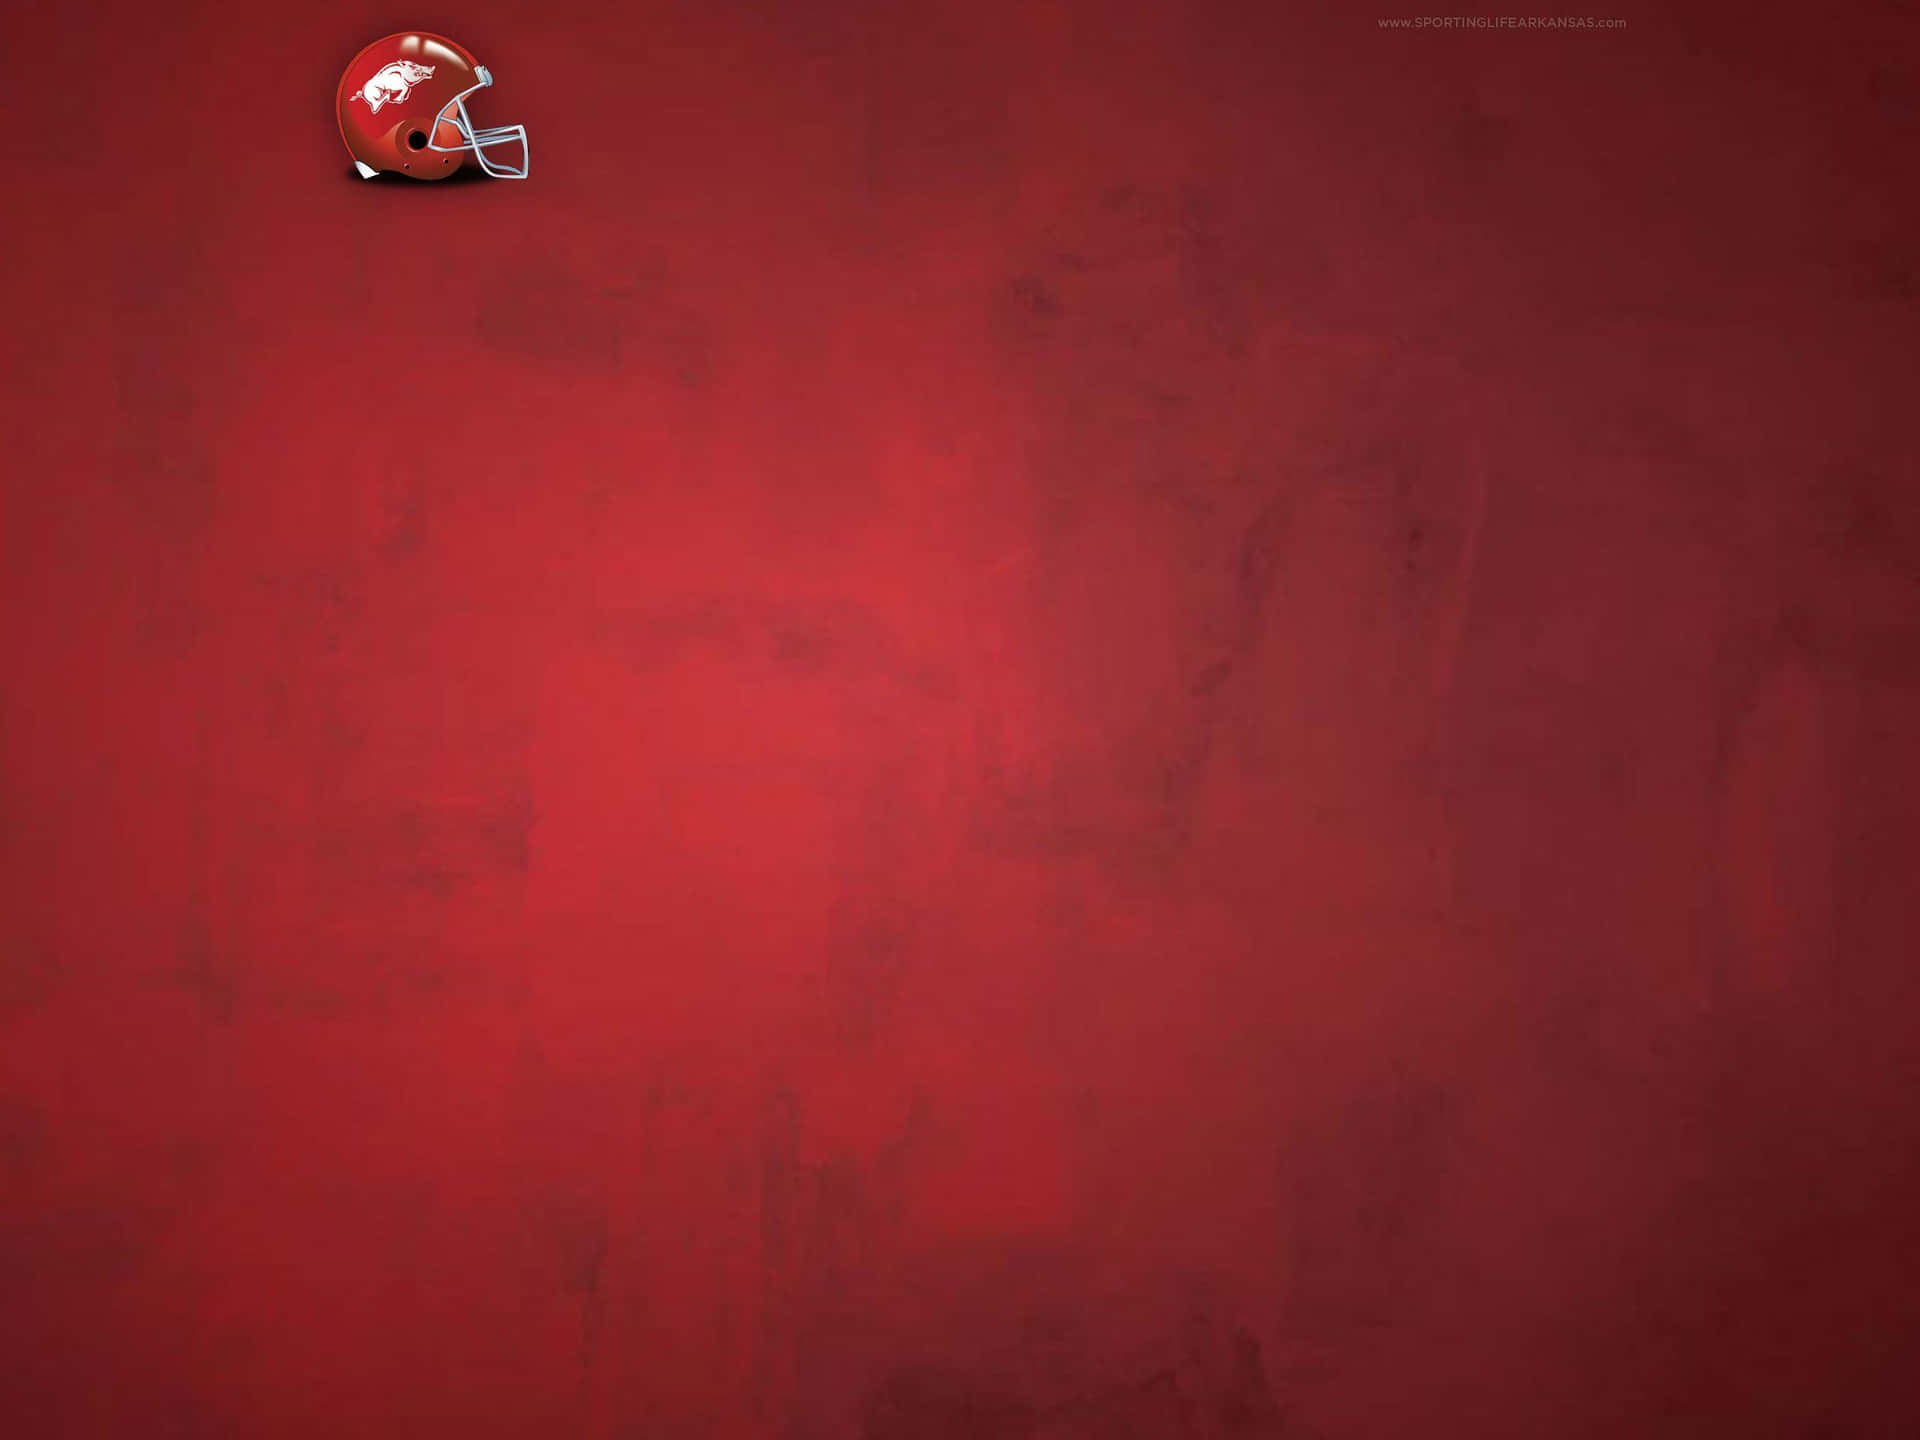 A Red Background With A Football Helmet On It Wallpaper